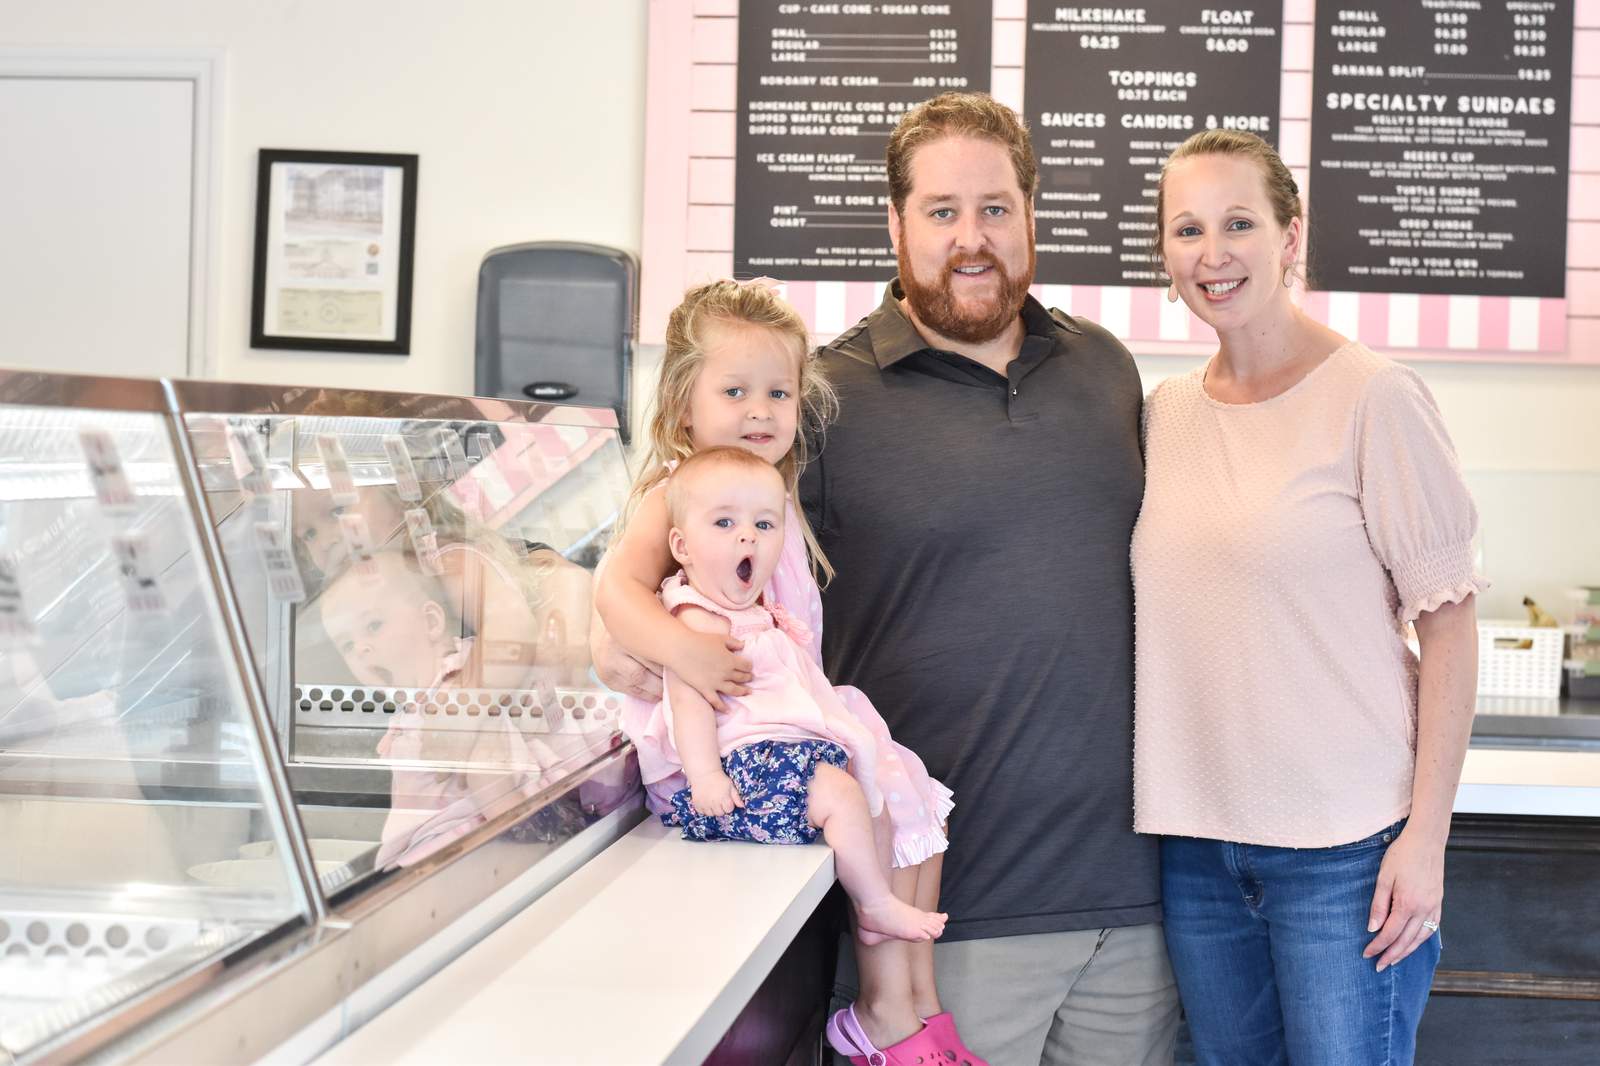 Kelly’s Homemade Ice Cream provides pop of pink, celebration in Orlando-area communities